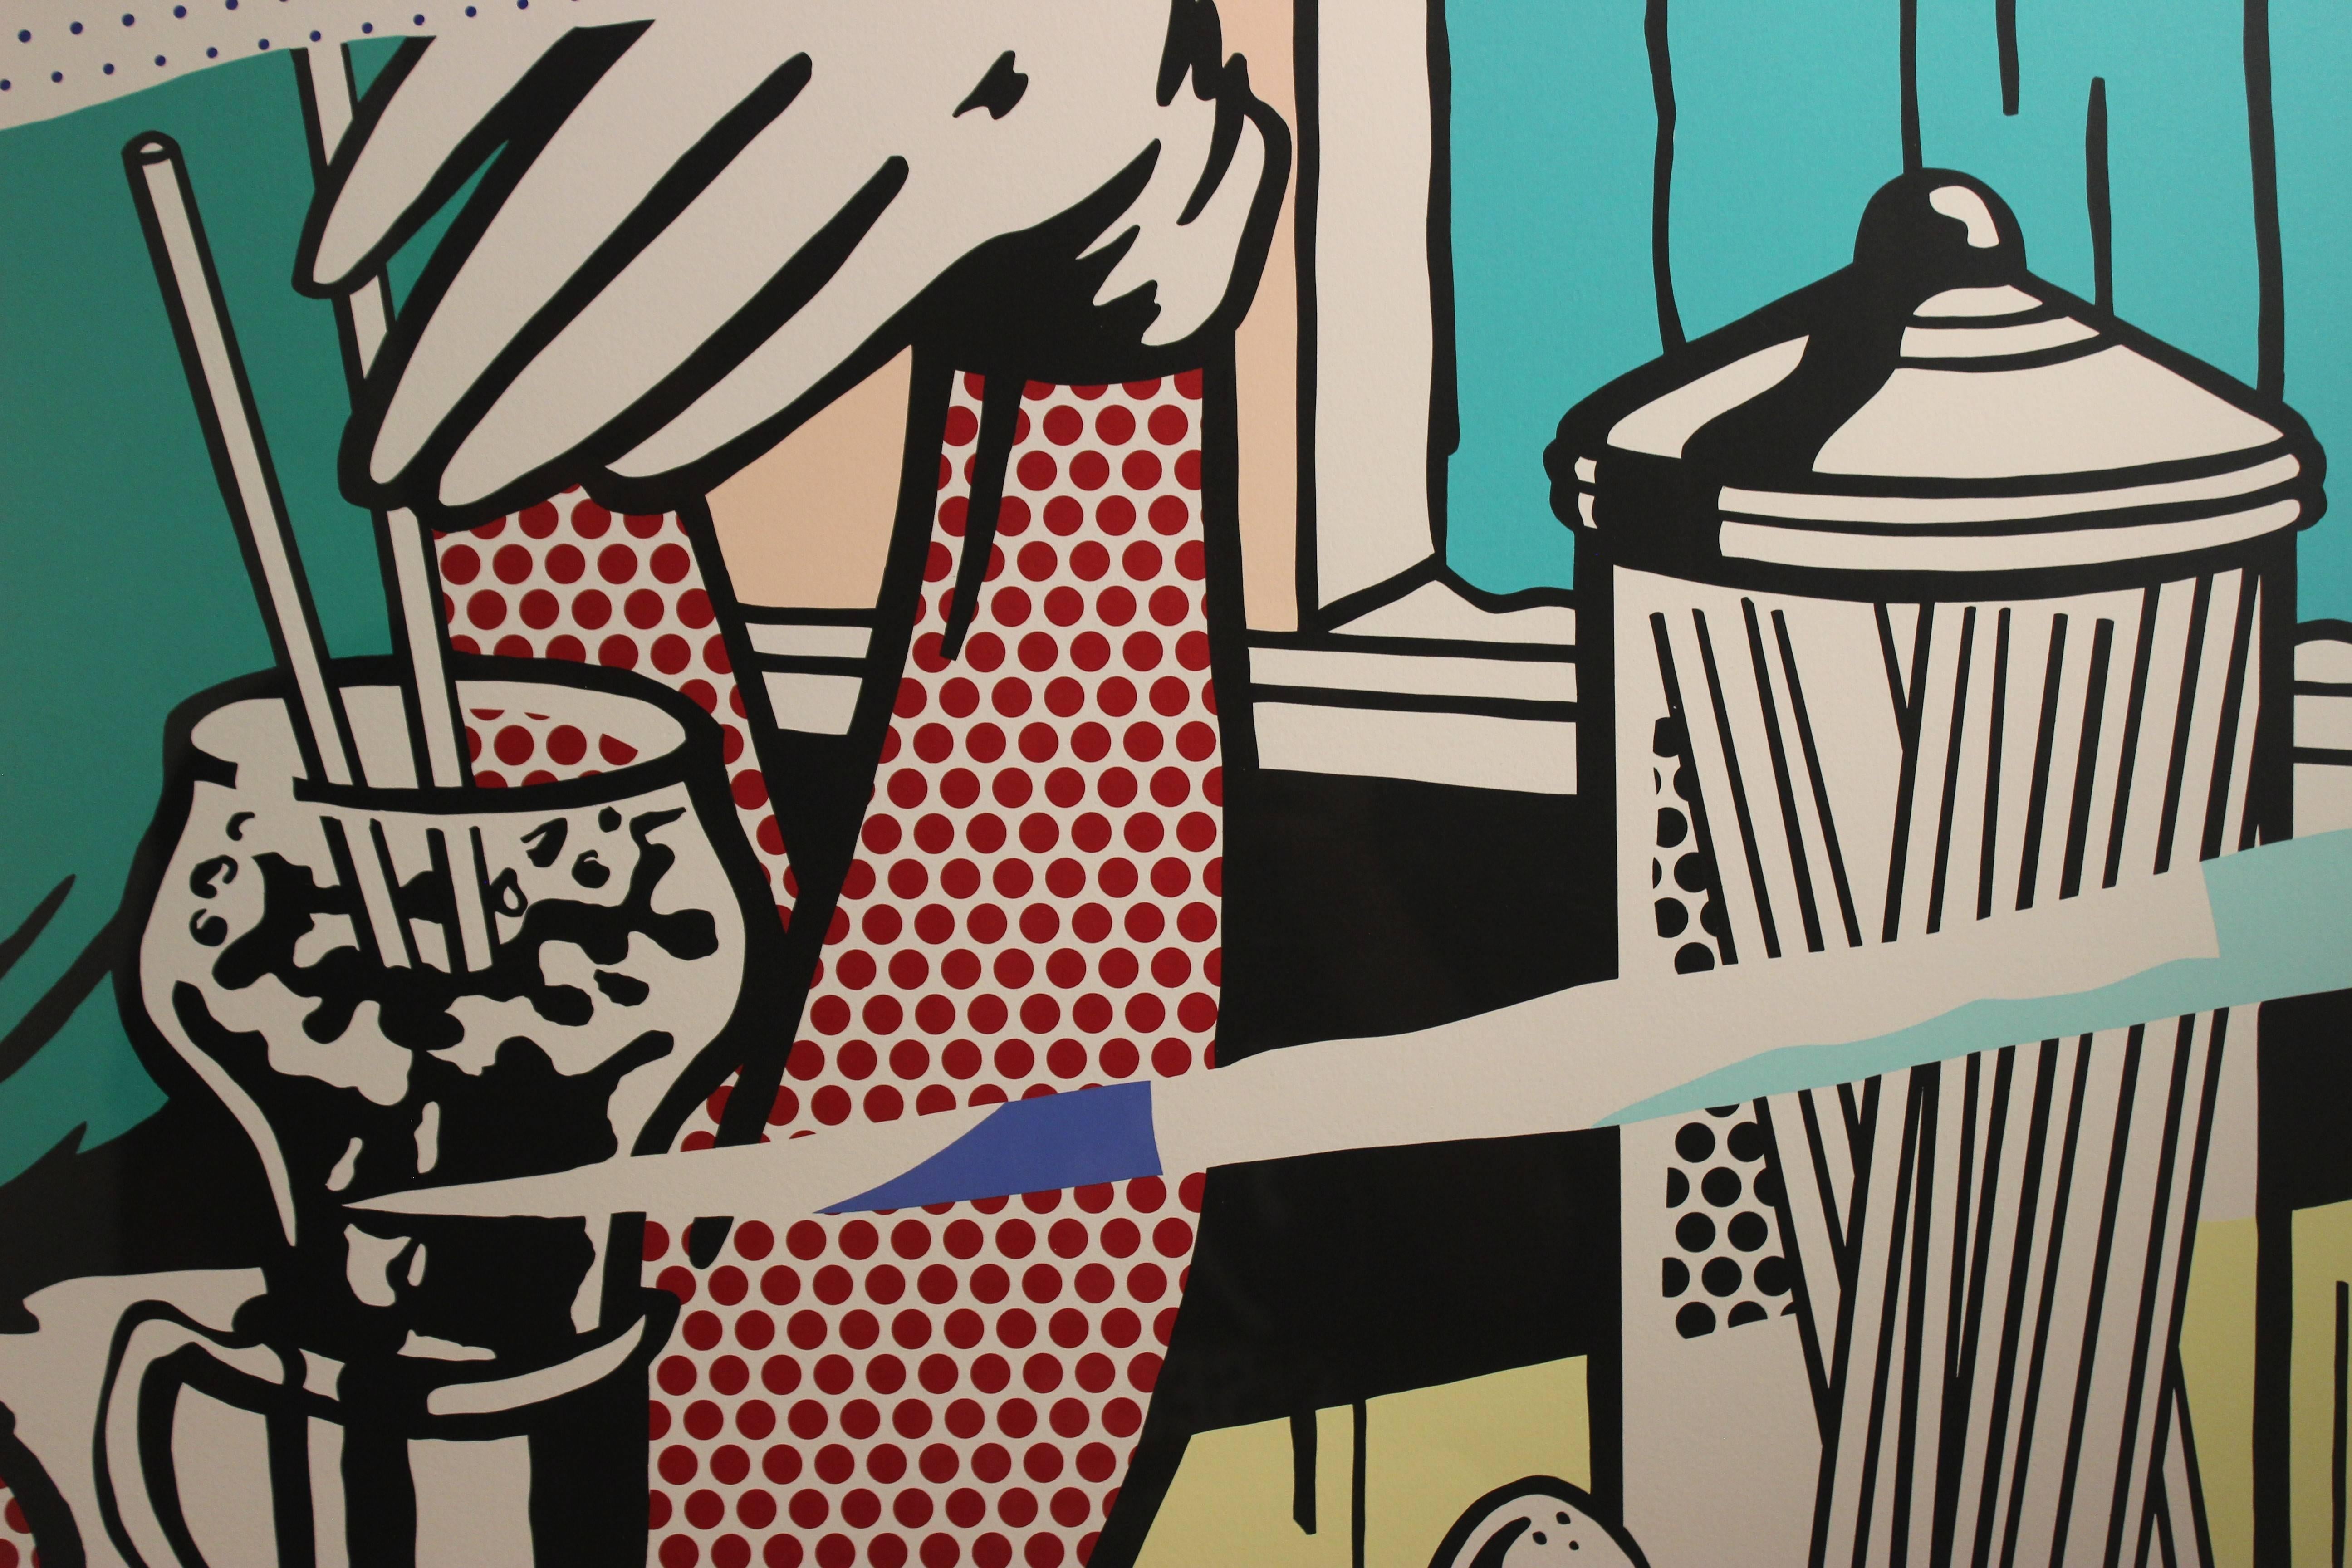 Artist: Roy Lichtenstein
Medium: Screenprint on Rives BFK paper
Title: Reflections on Soda Fountain
Year: 1991
Edition: AP 17/30
Image Size: 28 3/4